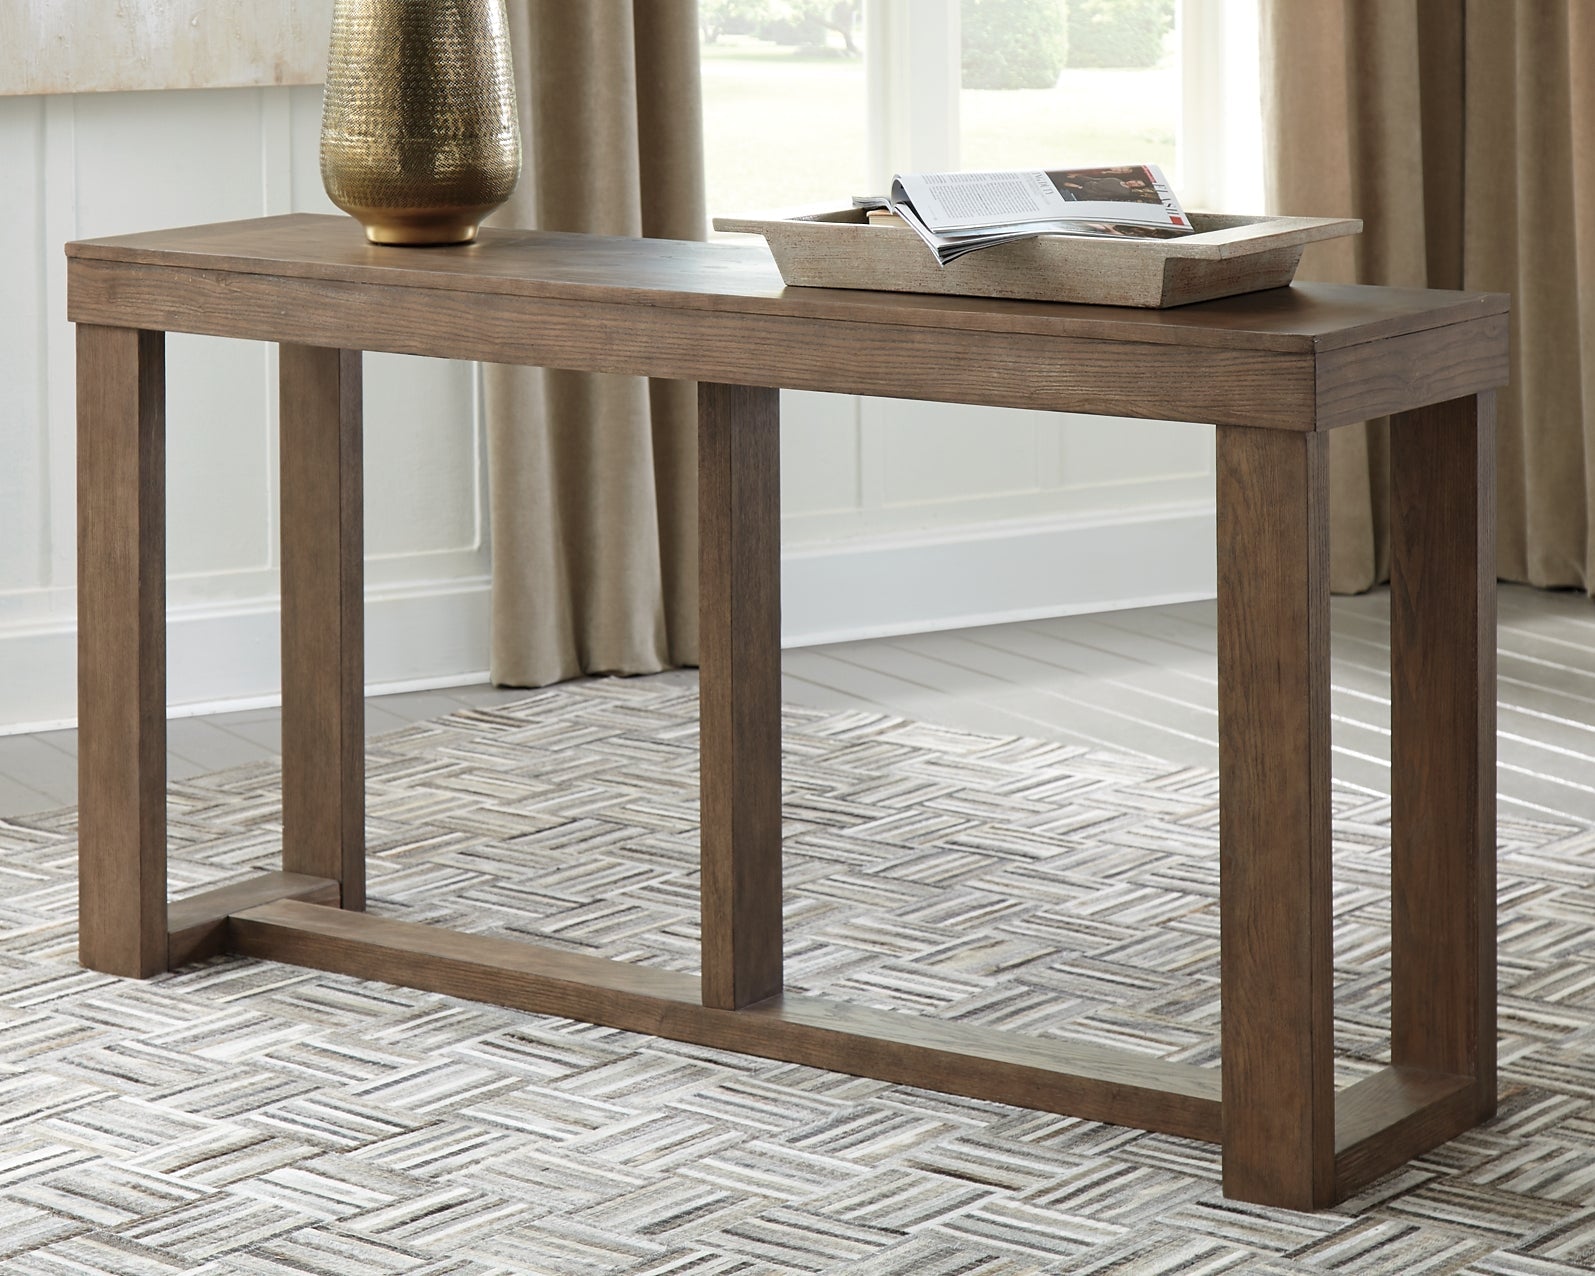 Cariton Sofa Table Rent Wise Rent To Own Jacksonville, Florida